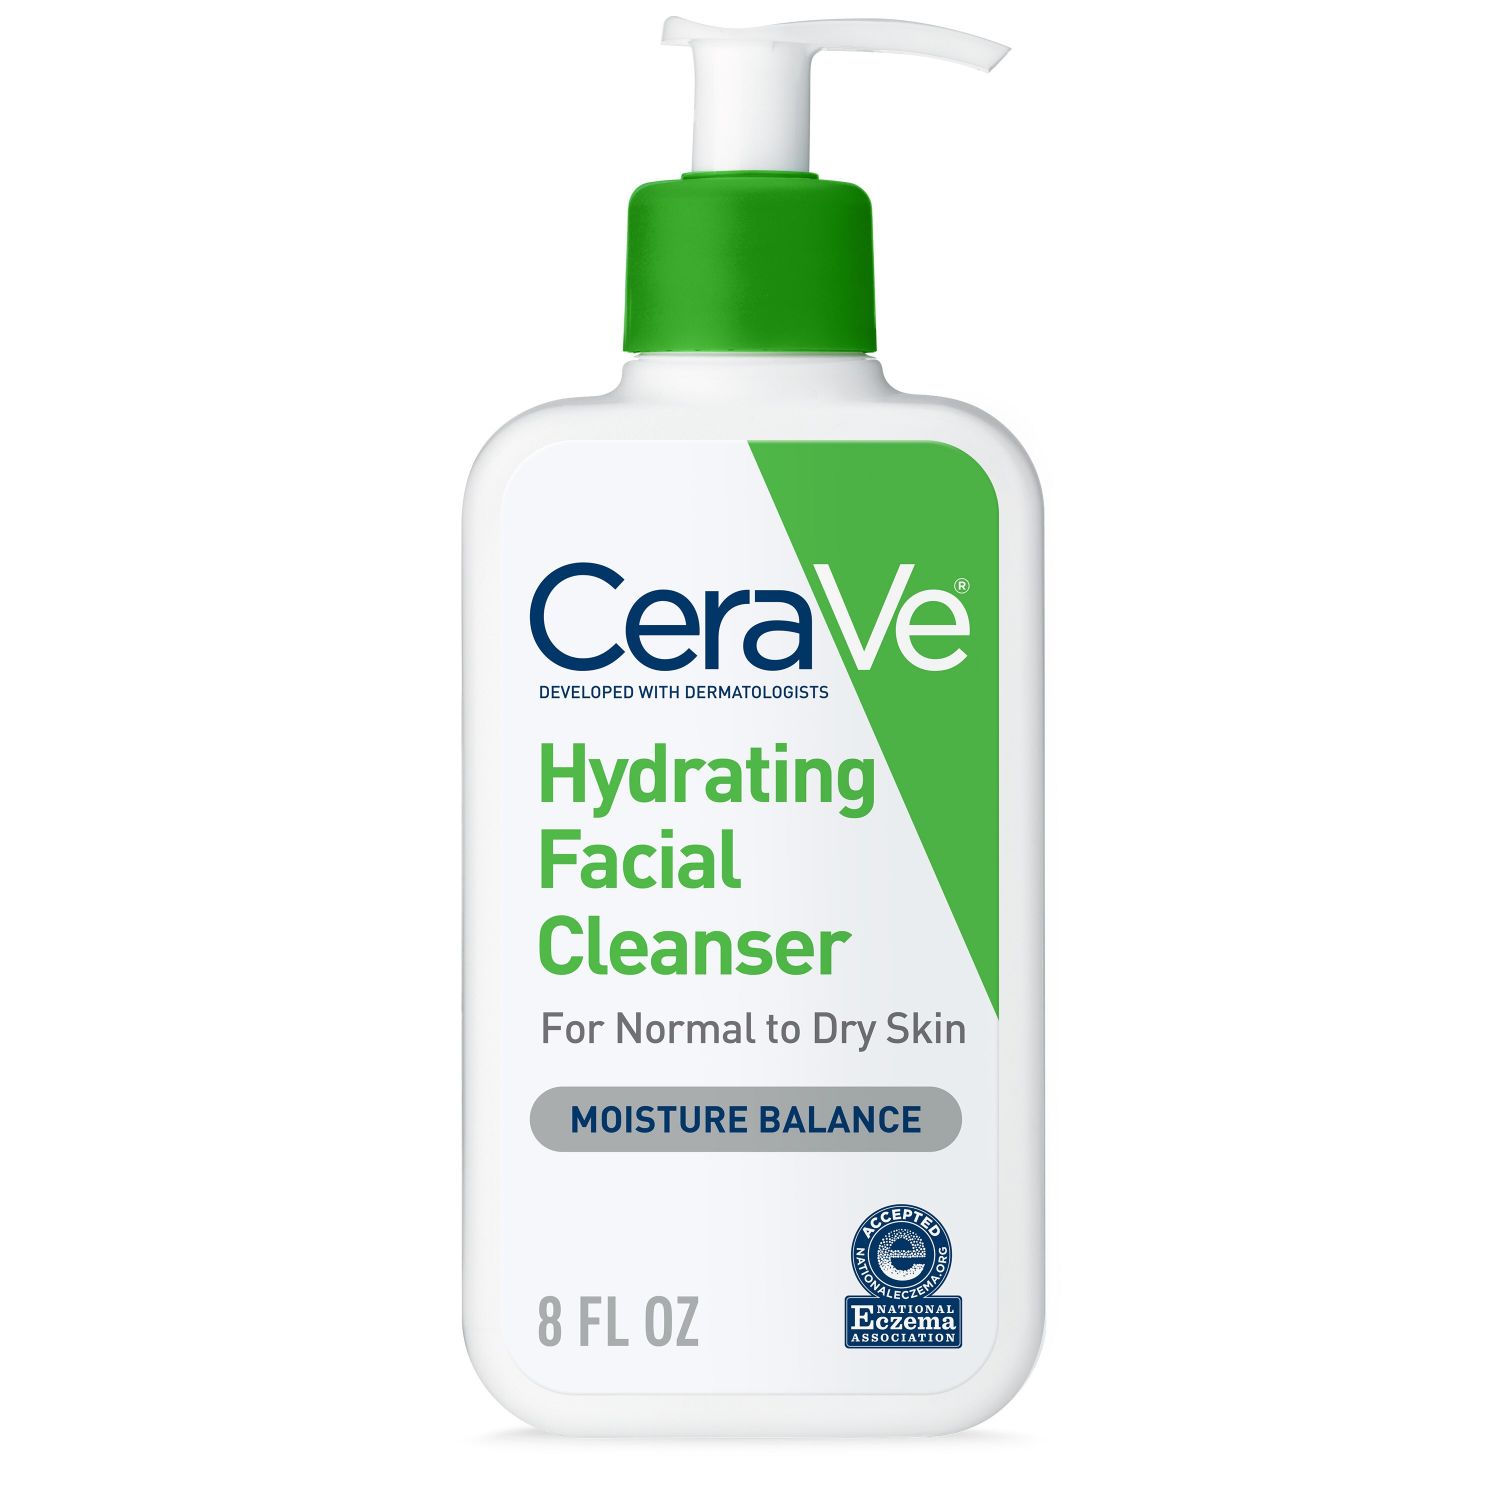 CeraVe Hydrating Cleanser 12 oz